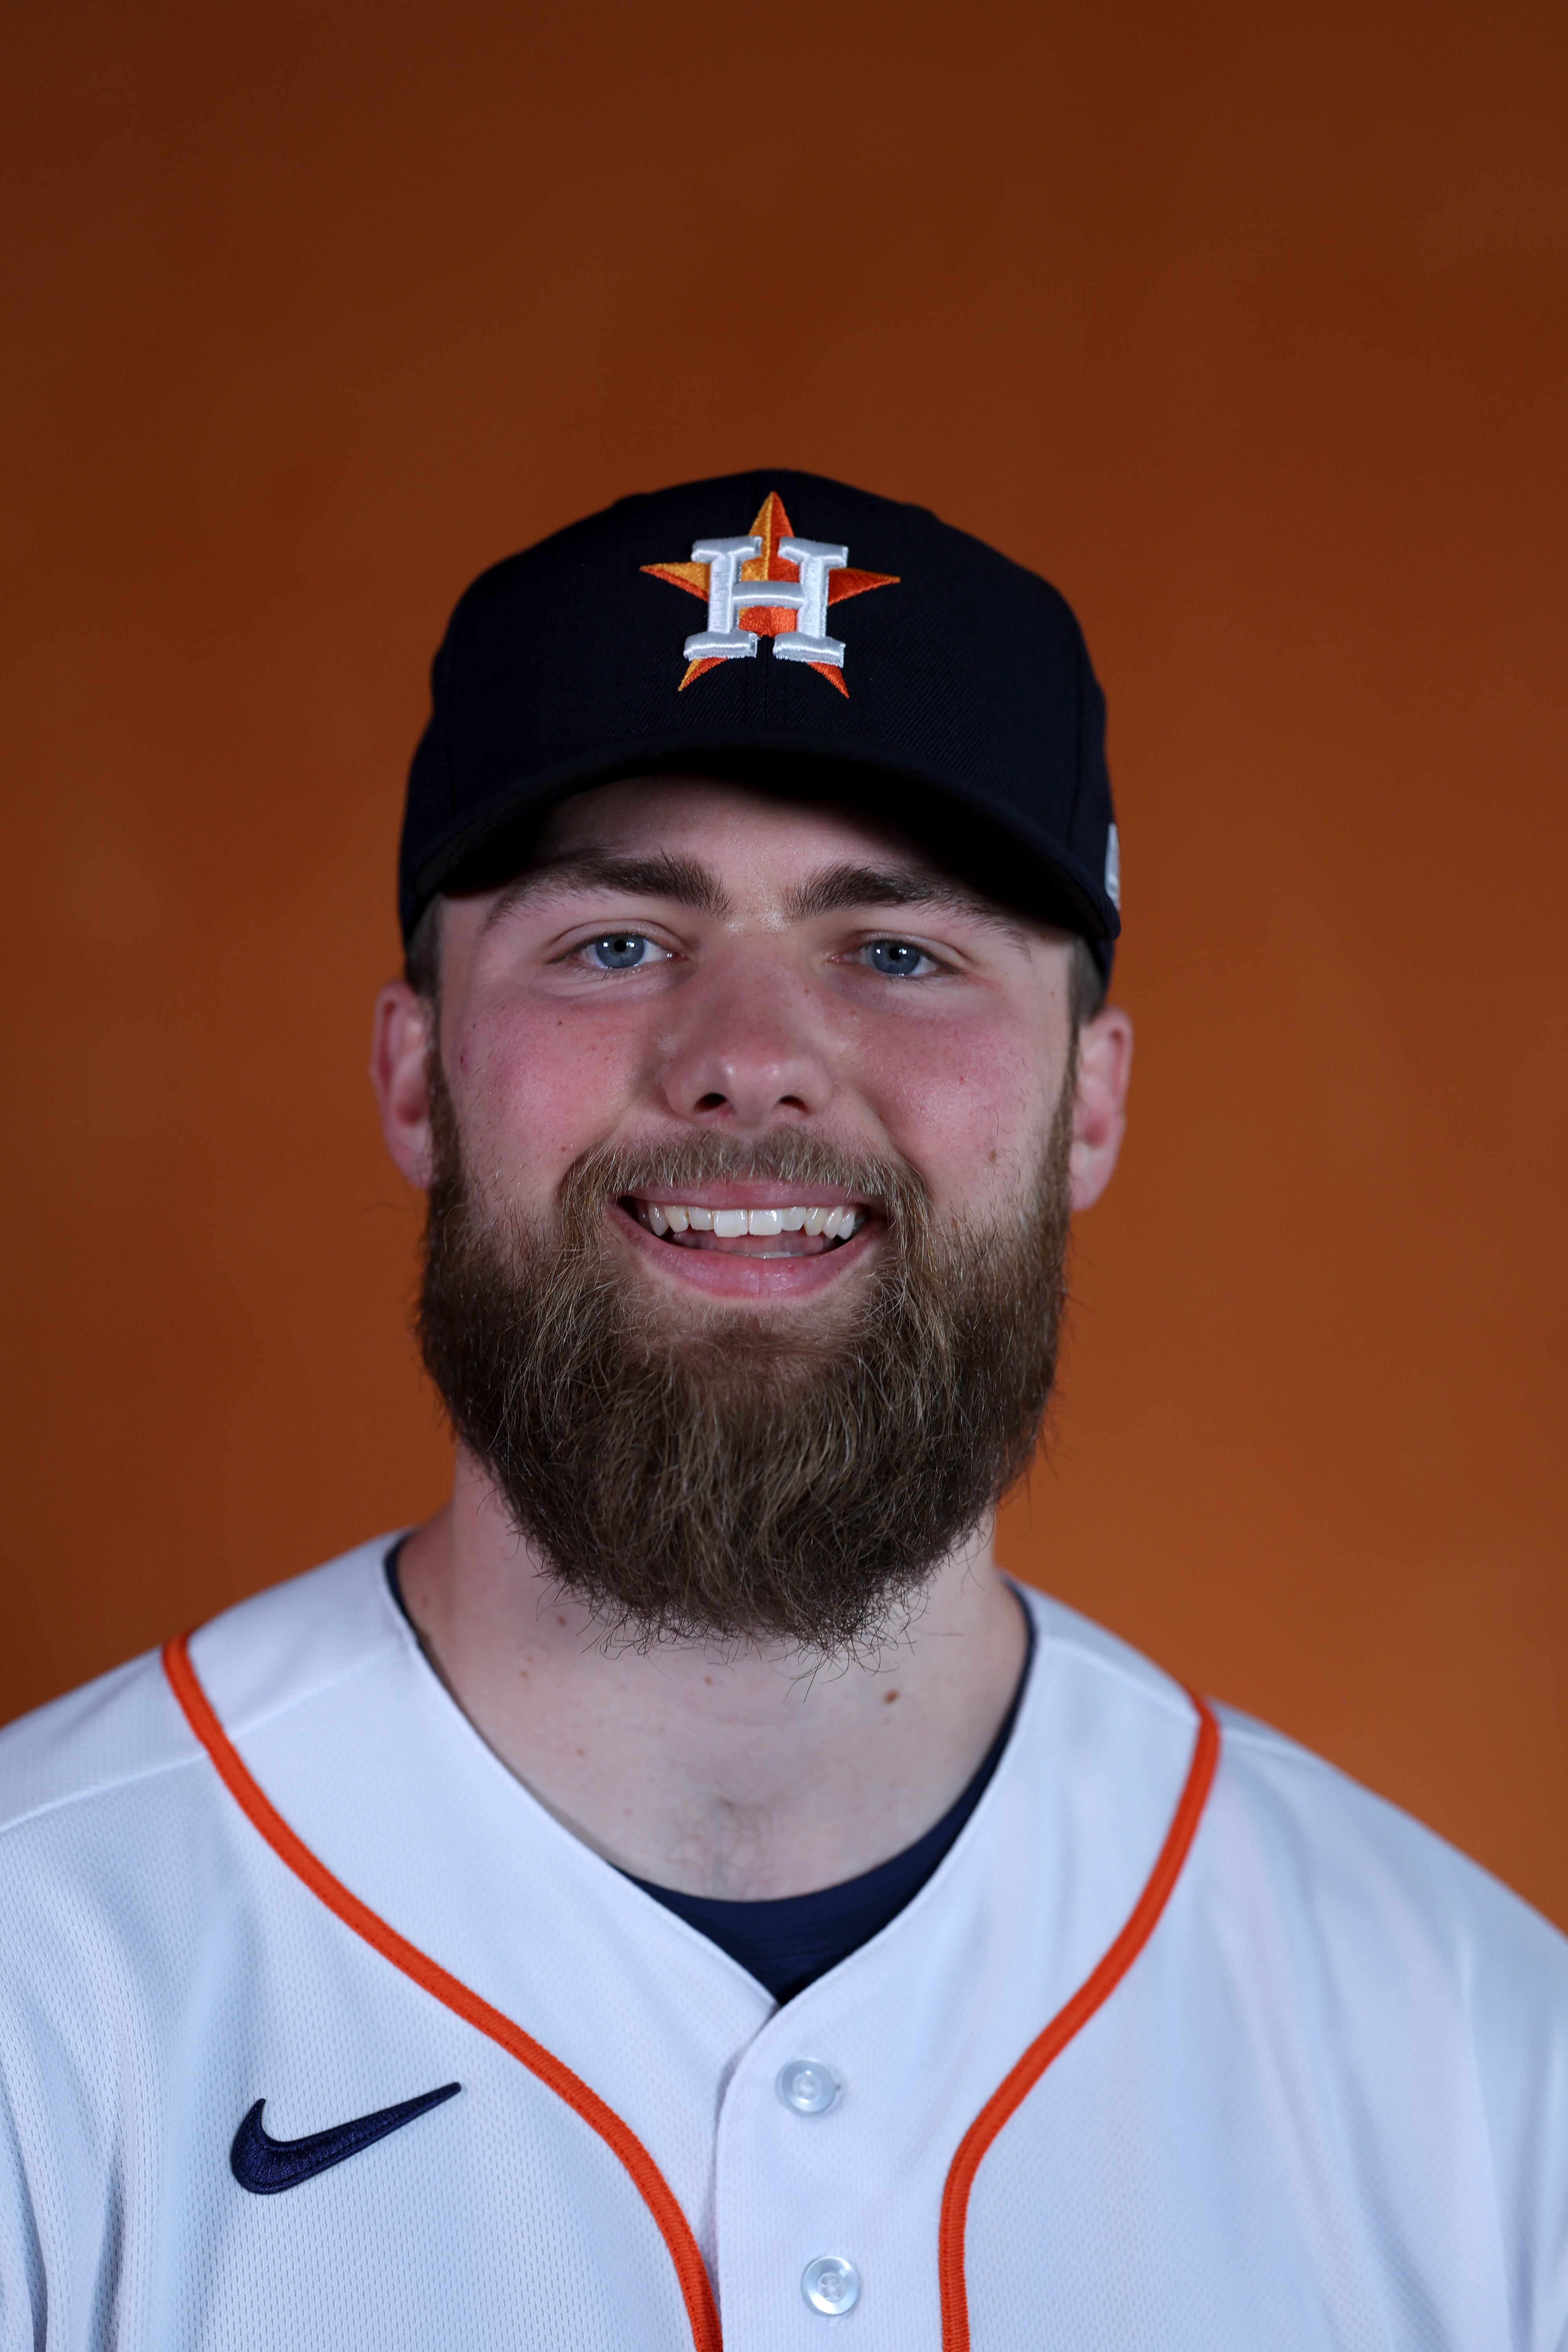 Earning a spot on the Astros roster - These guys have a shot